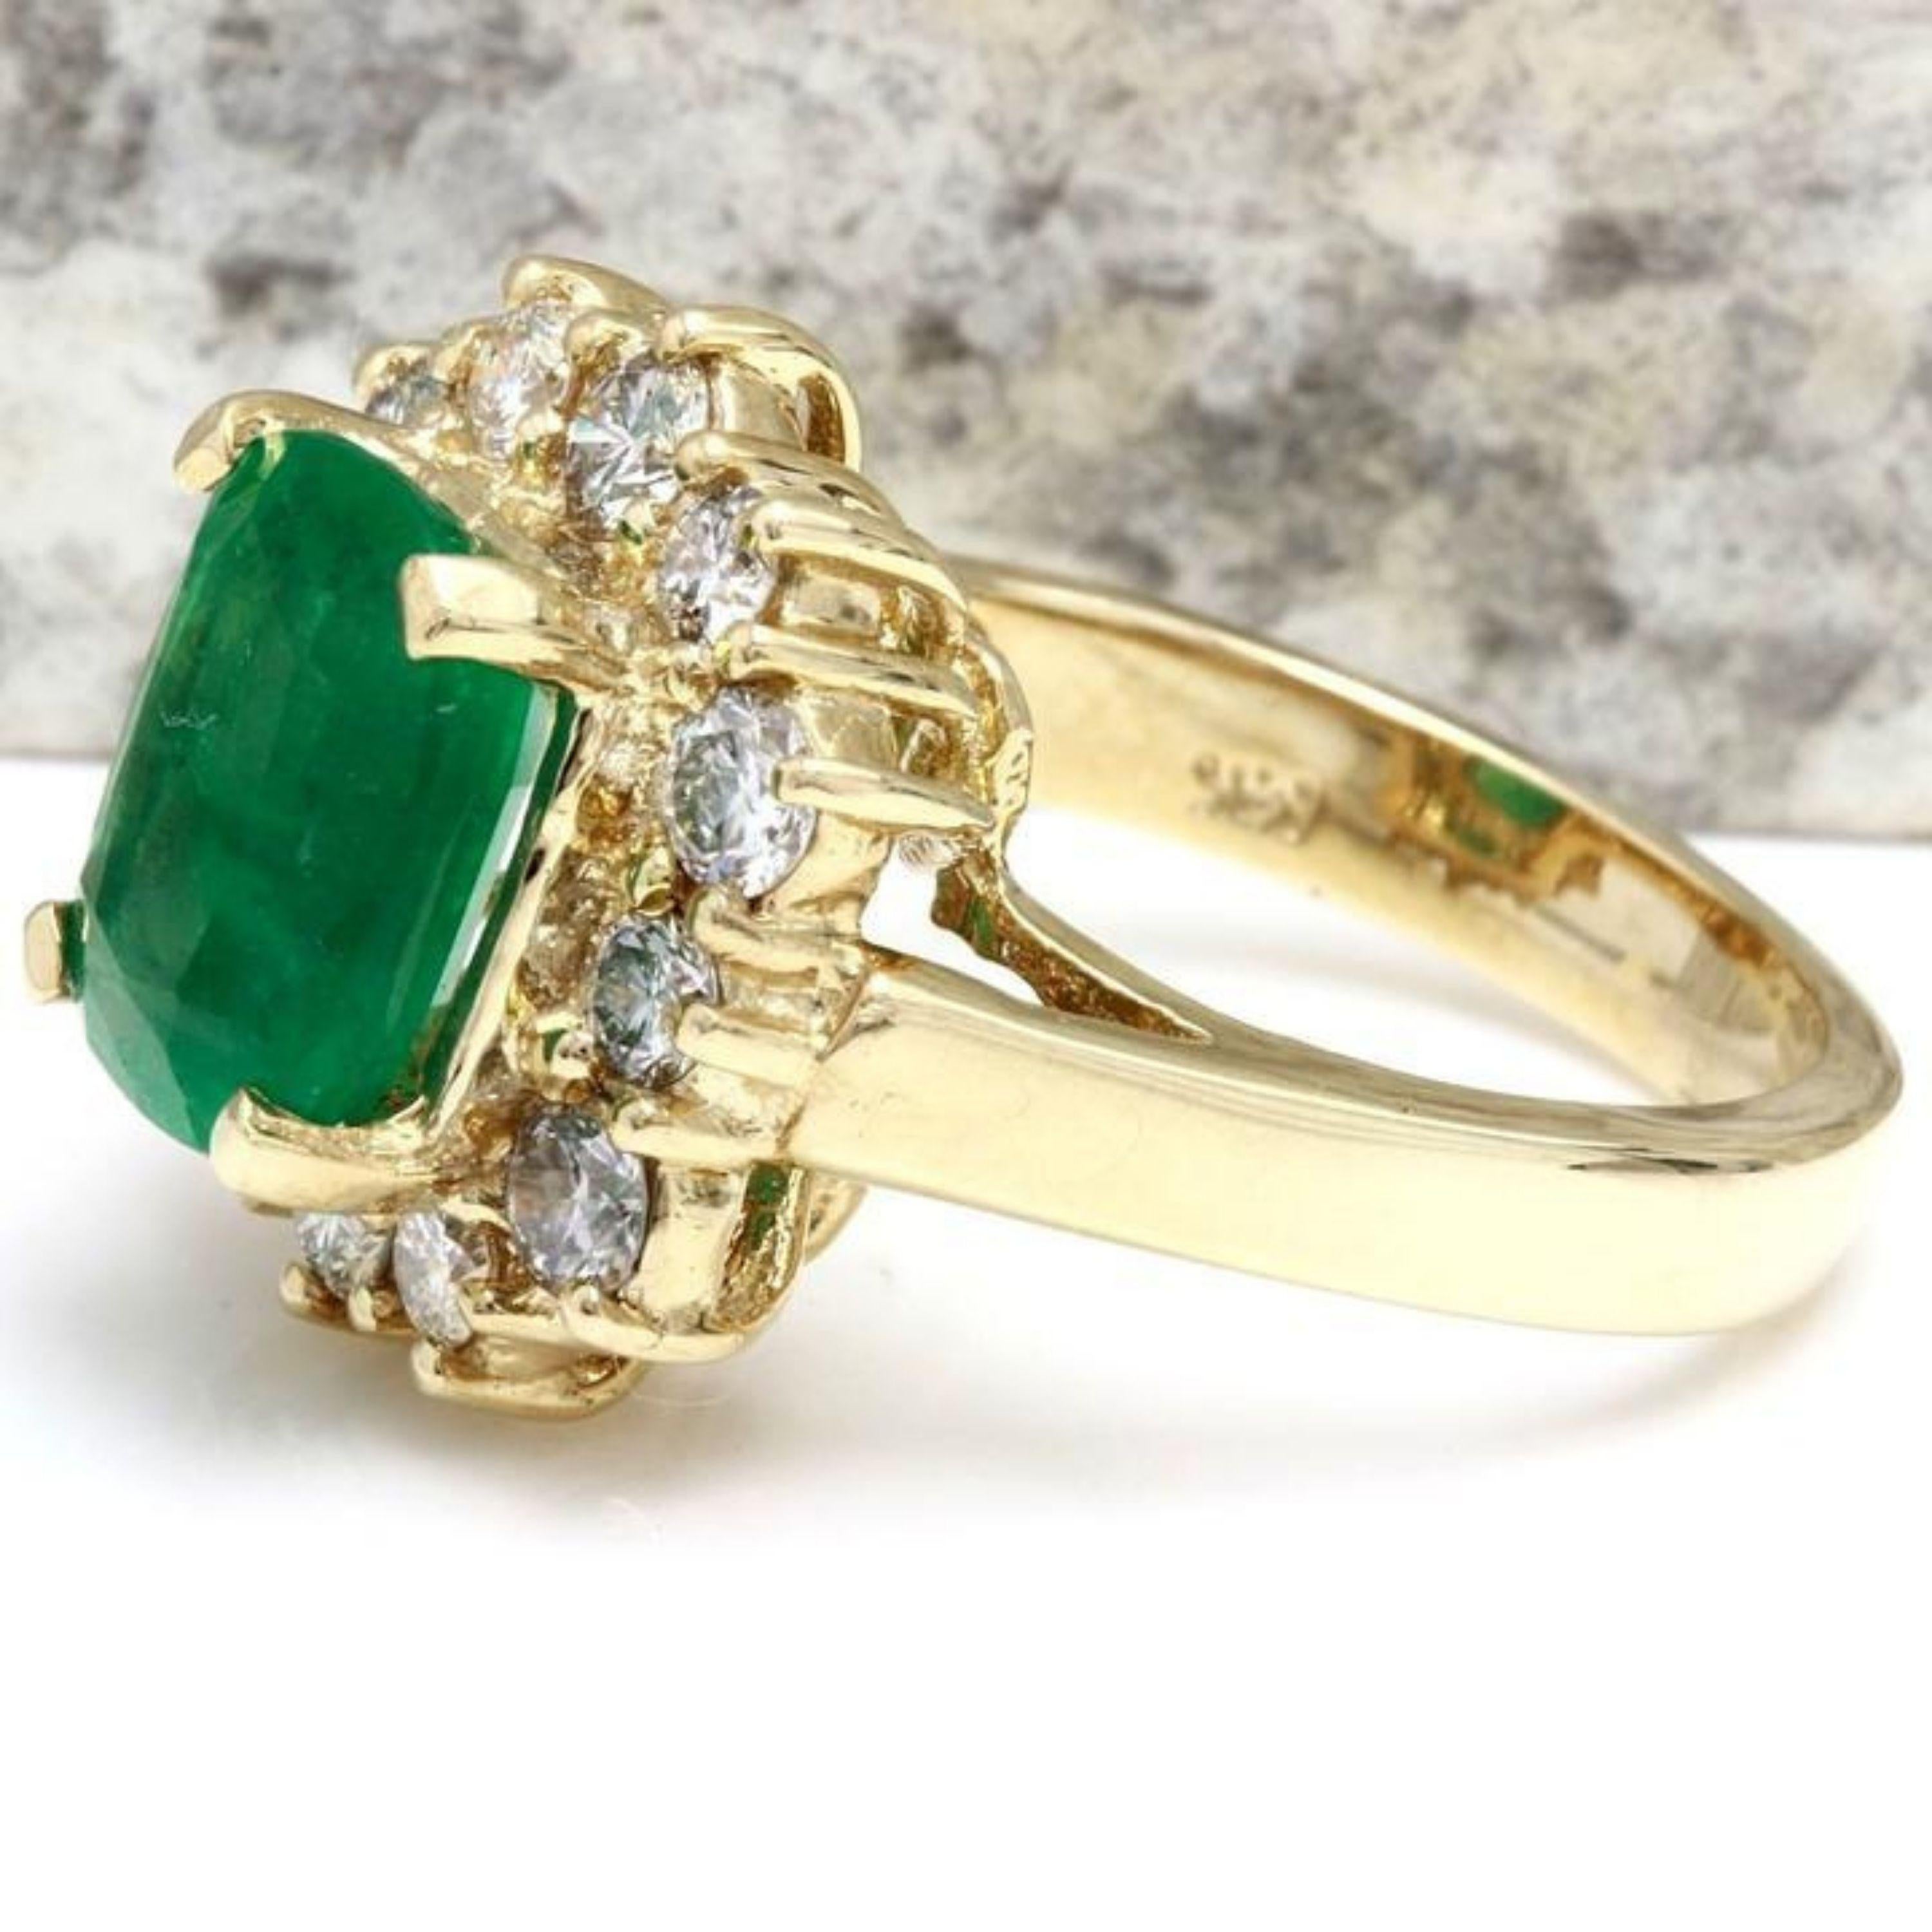 4.00 Carats Natural Emerald and Diamond 14K Solid Yellow Gold Ring

Total Natural Cushion Cut Emerald Weight is: Approx. 2.75 Carats (transparent )

Emerald Measures: Approx. 9.86mm x 7.90mm

Emerald Treatment: Oiling

Natural Round Diamonds Weight: